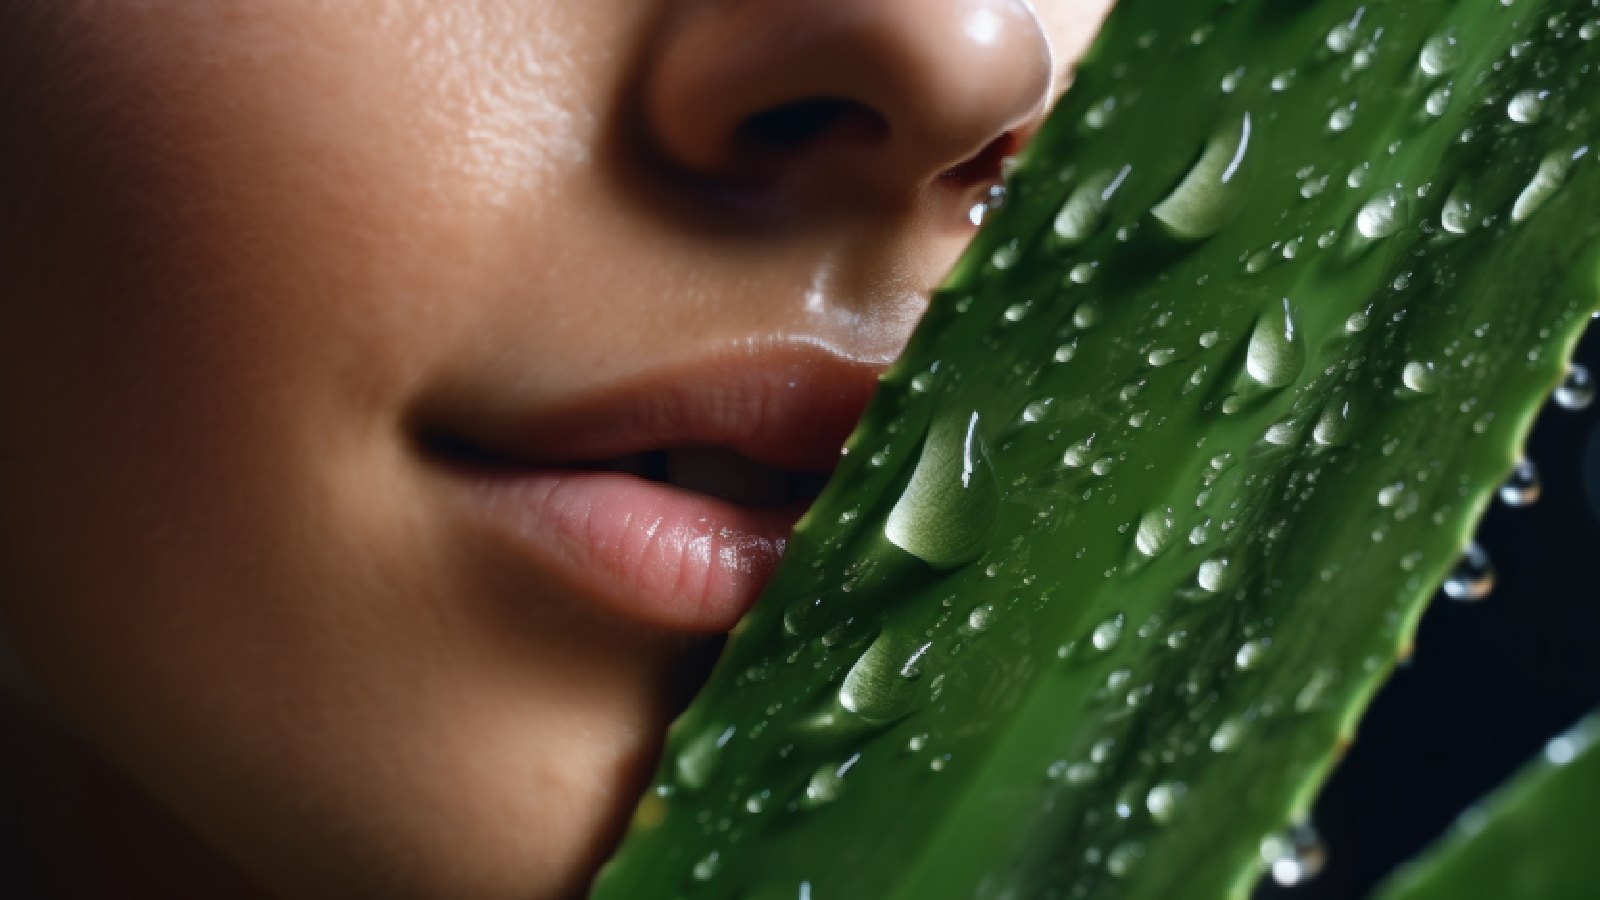 Does aloe vera work for chapped lips?